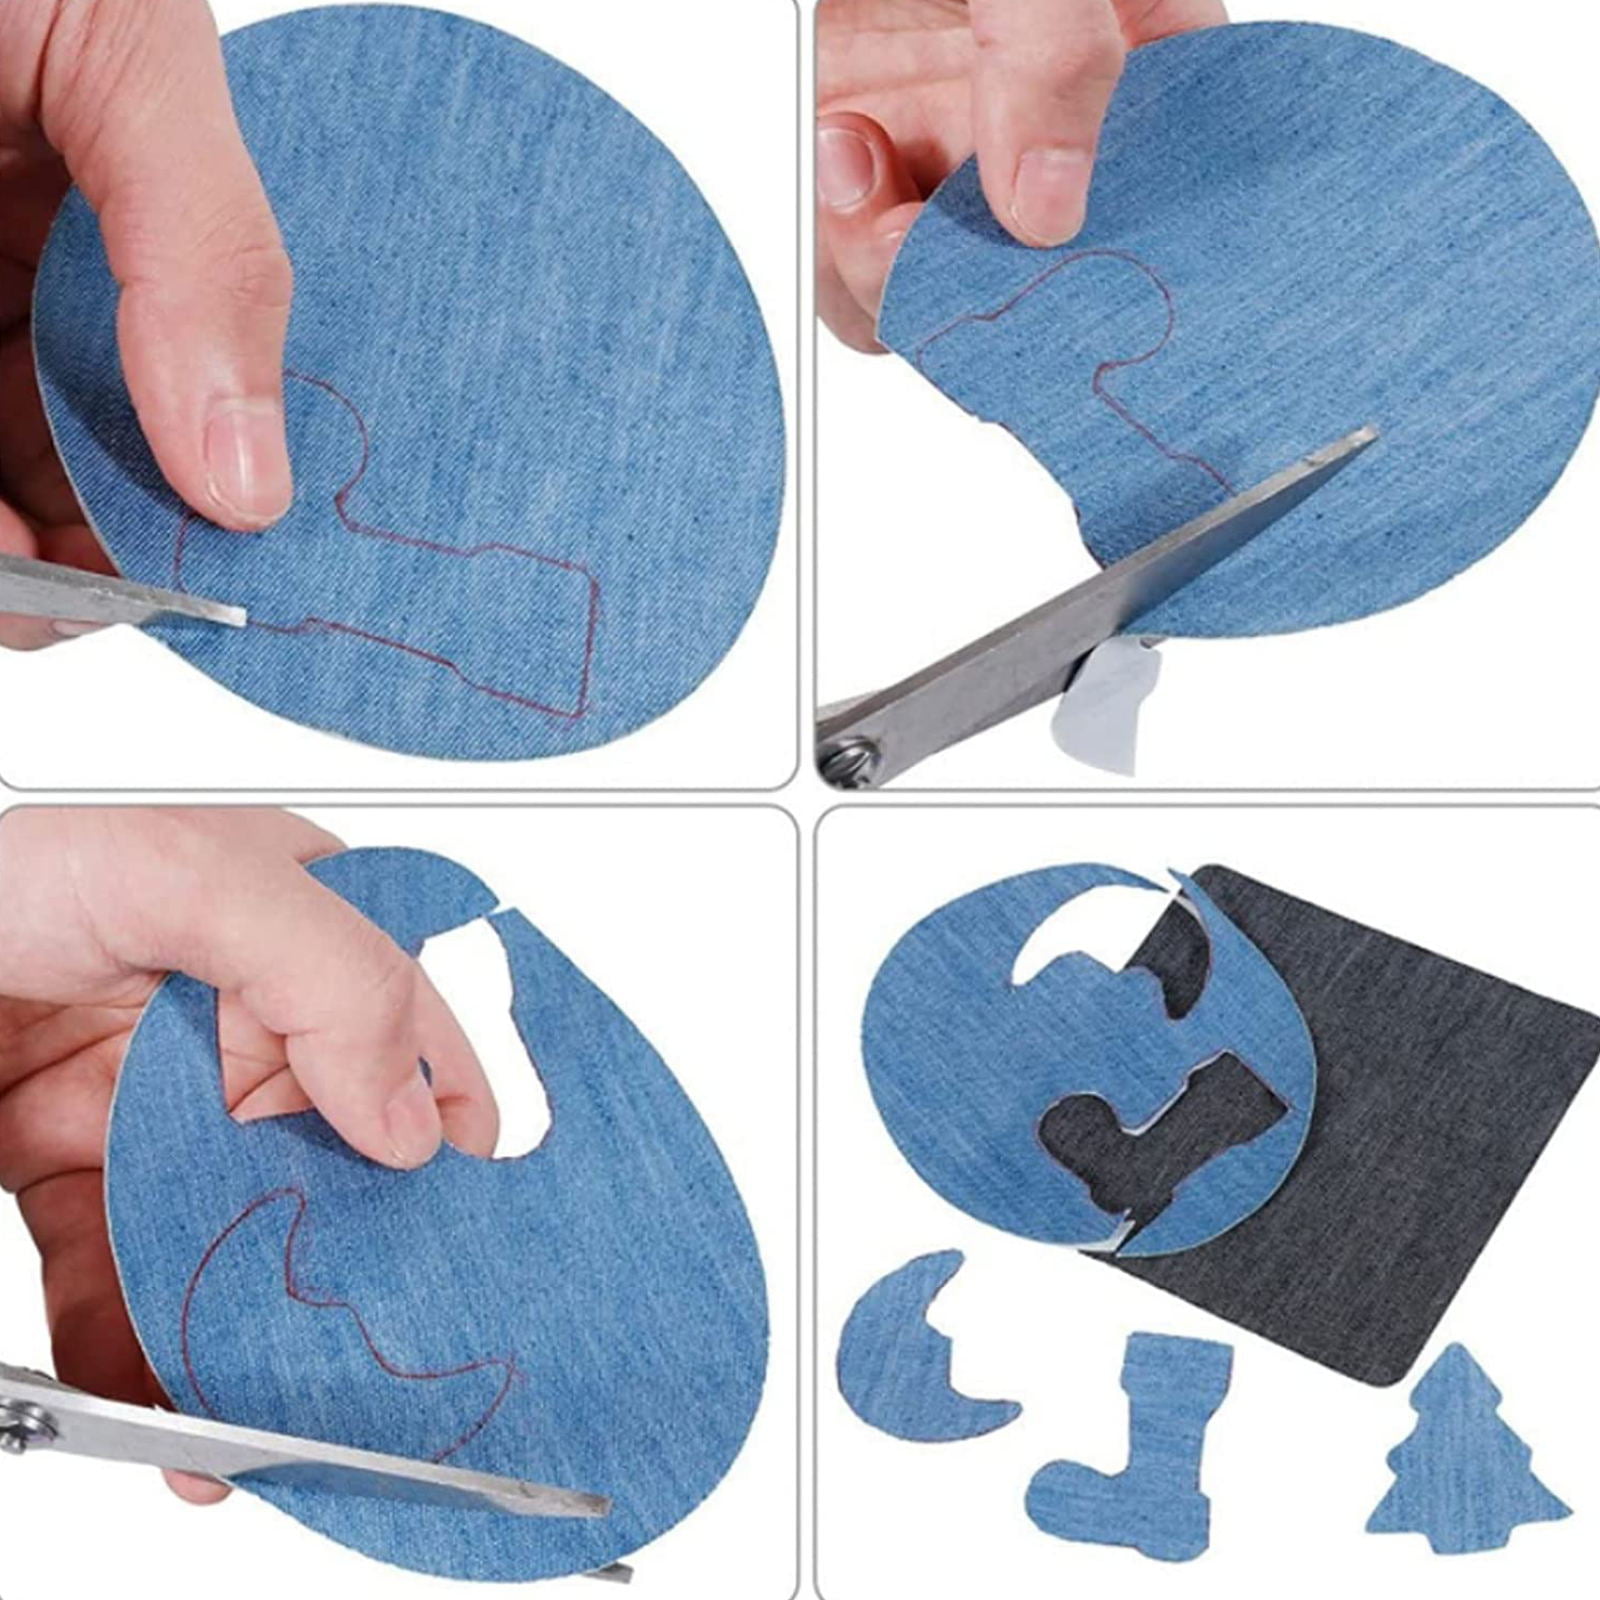 25/20/5pc Denim Iron-on Jean Patches Self Adhesive Patches Cotton Repair  Patch for DIY Denim Jeans Clothing Repair Jacket Decor